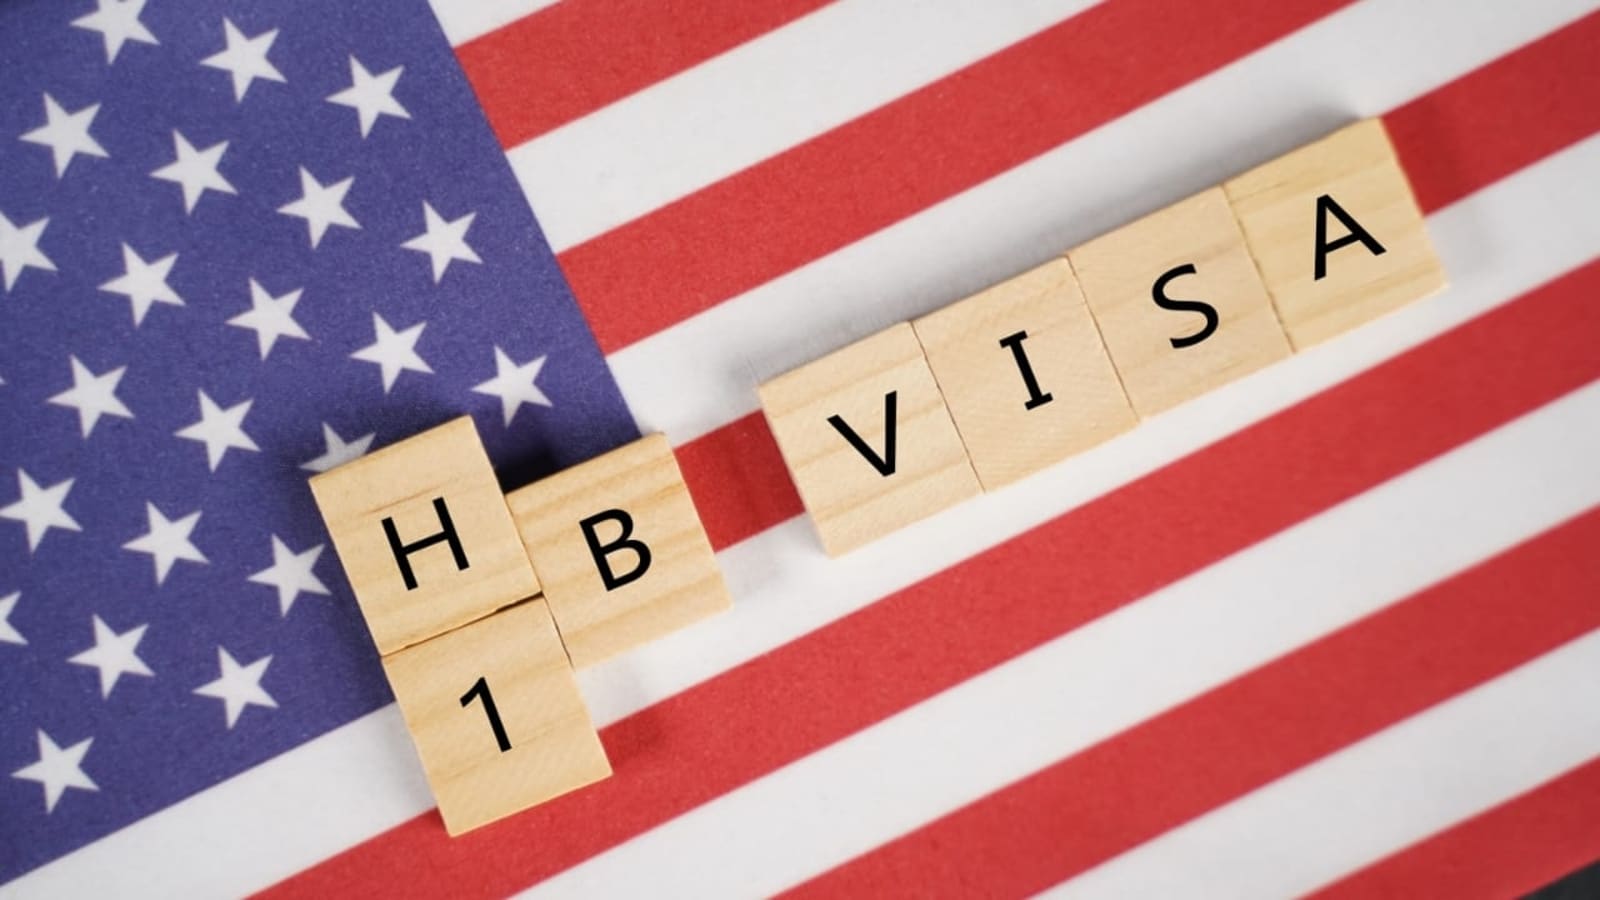 H-1B and L-1 visa extensions could weigh thousands of dollars heavier on US employers, according to new DHS proposal